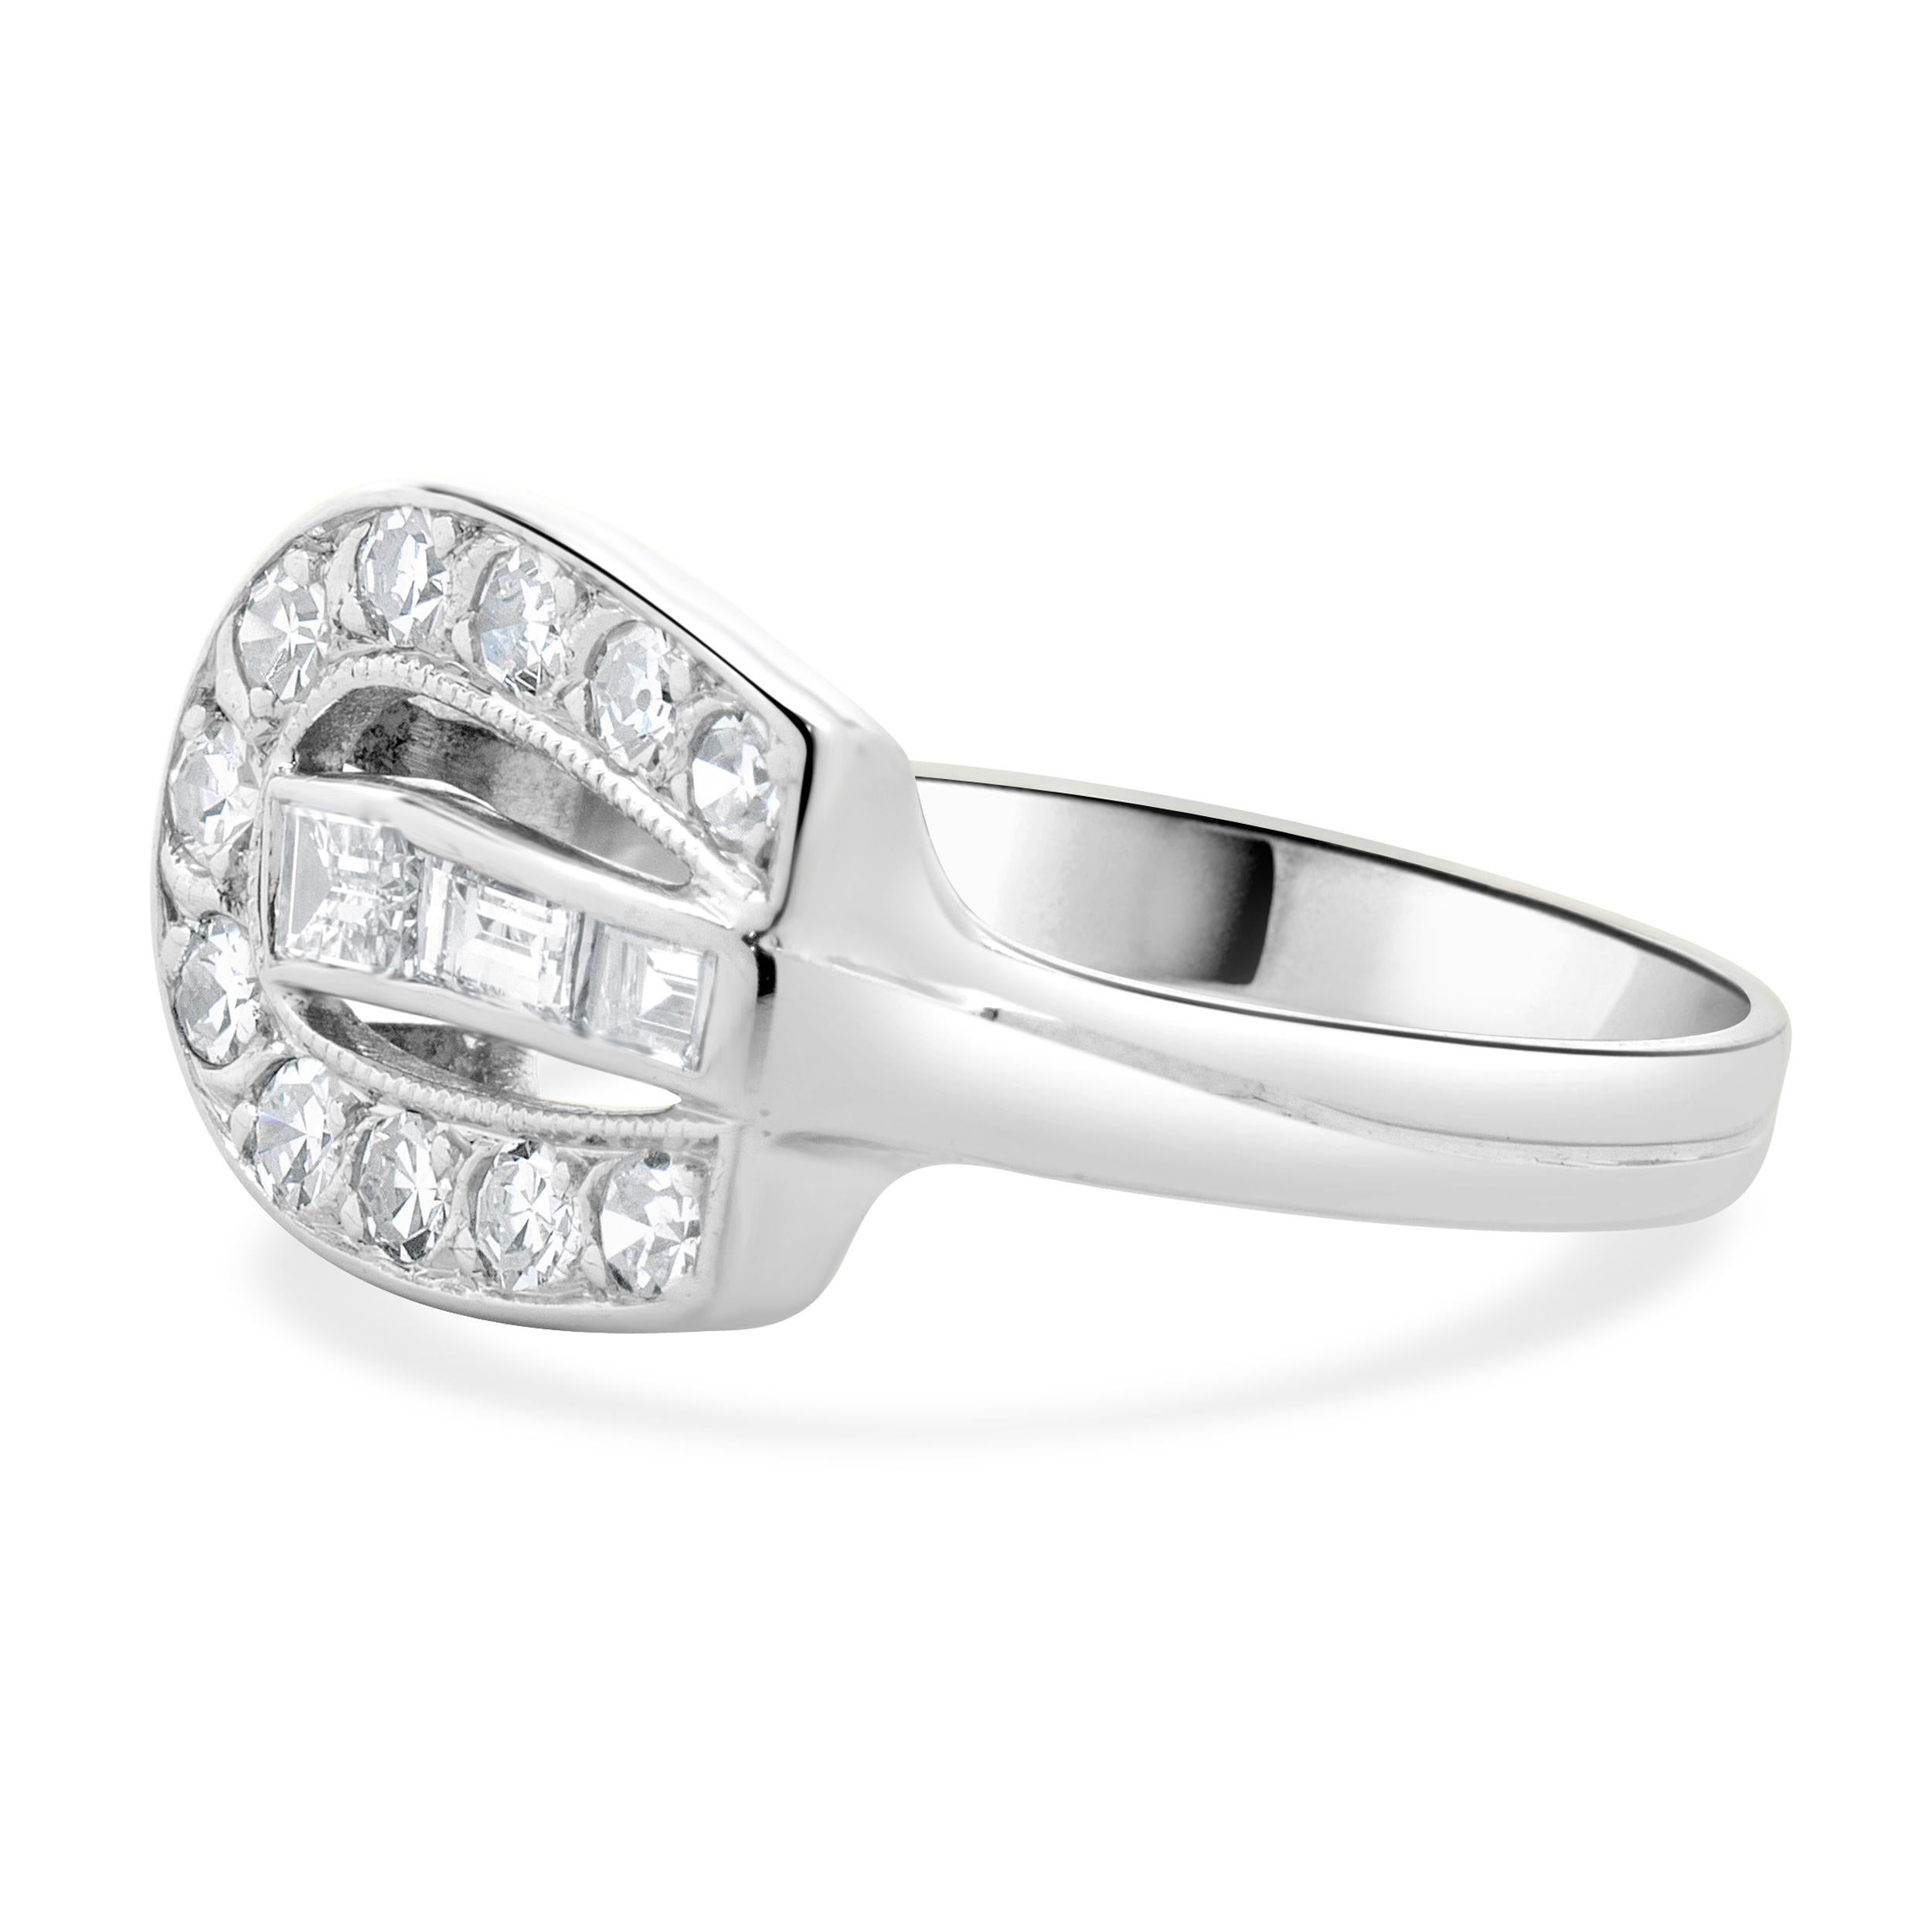 Designer: custom
Material: 14K white gold
Diamond: 12 round single cut = 0.25cttw
Color: G 
Clarity: VS2-SI1
Diamond: 3 baguette cut = 0.25cttw
Color: H
Clarity: VS2
Size: 4.5 sizing available 
Weight: 2.45 grams
